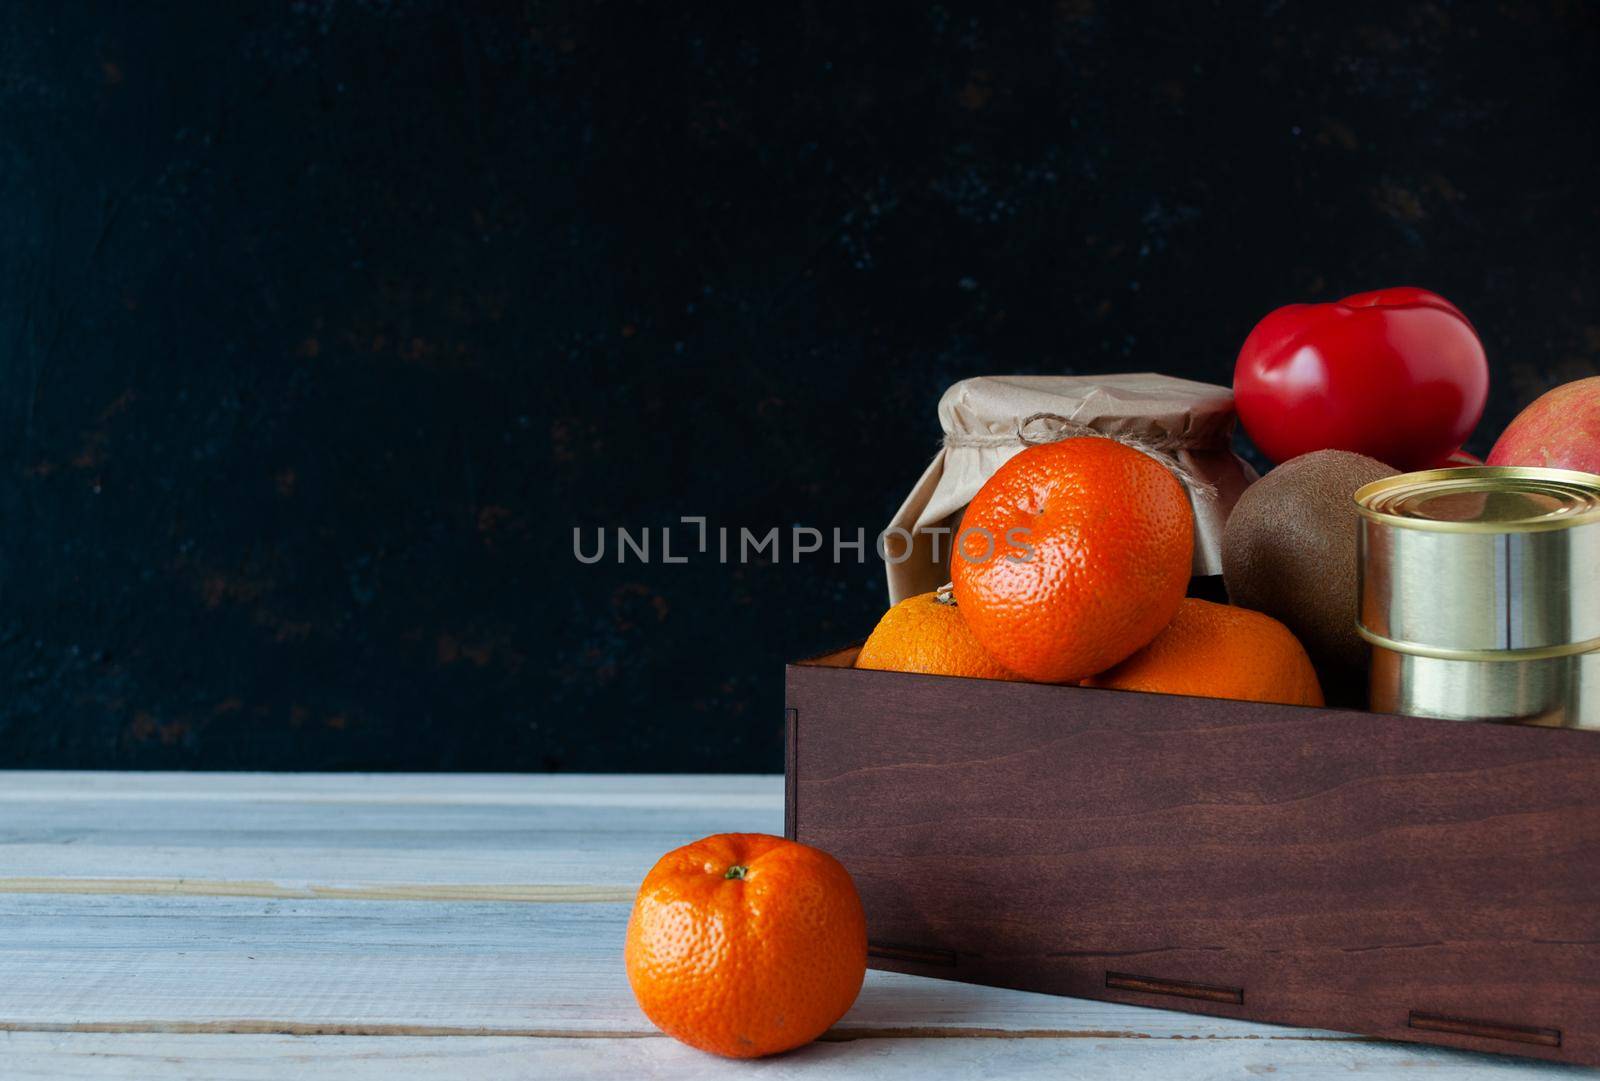 Food delivery during quarantine and isolation. Products folded in a box on a wooden white table background. Fruits vegetables, canned goods, cereals. Concept of donation and mercy. Copy space.